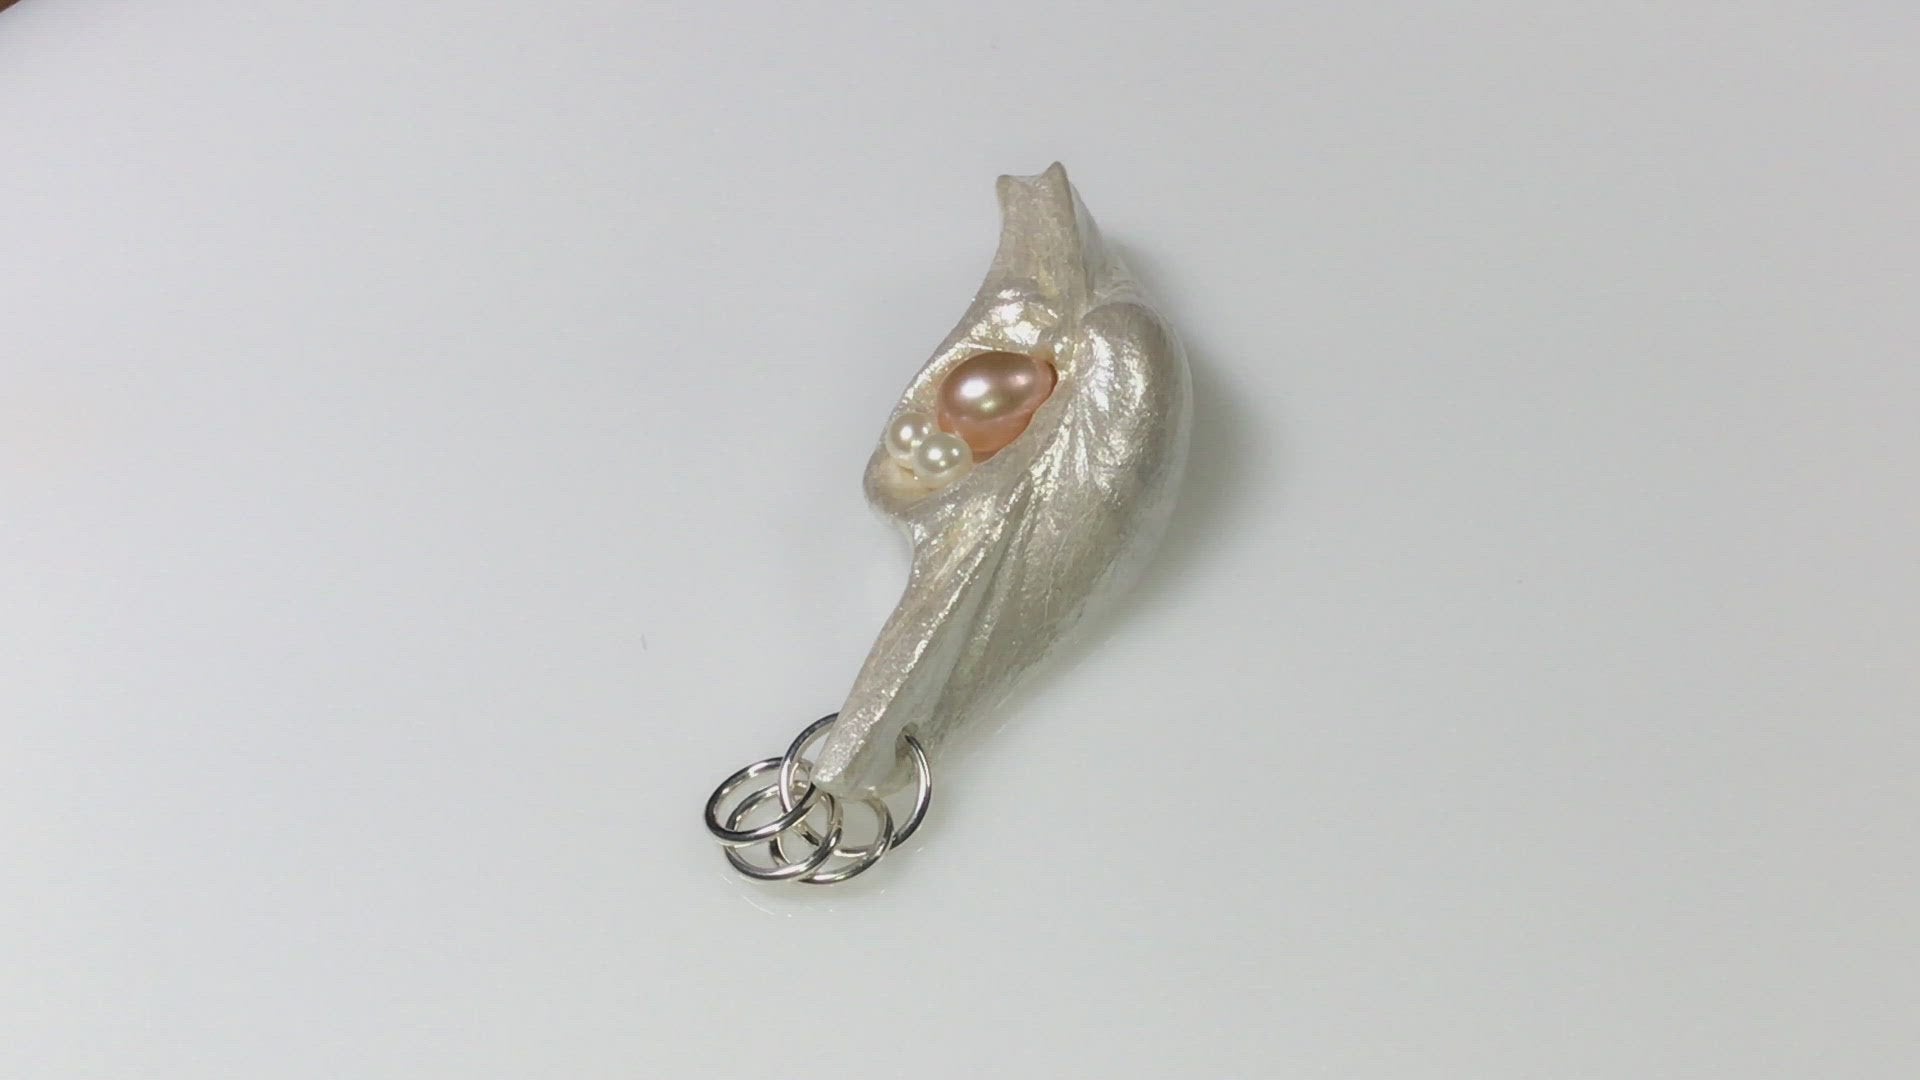 A video showcasing This natural seashell pendant has a real 7-8mm pink freshwater pearl and two baby pearls.